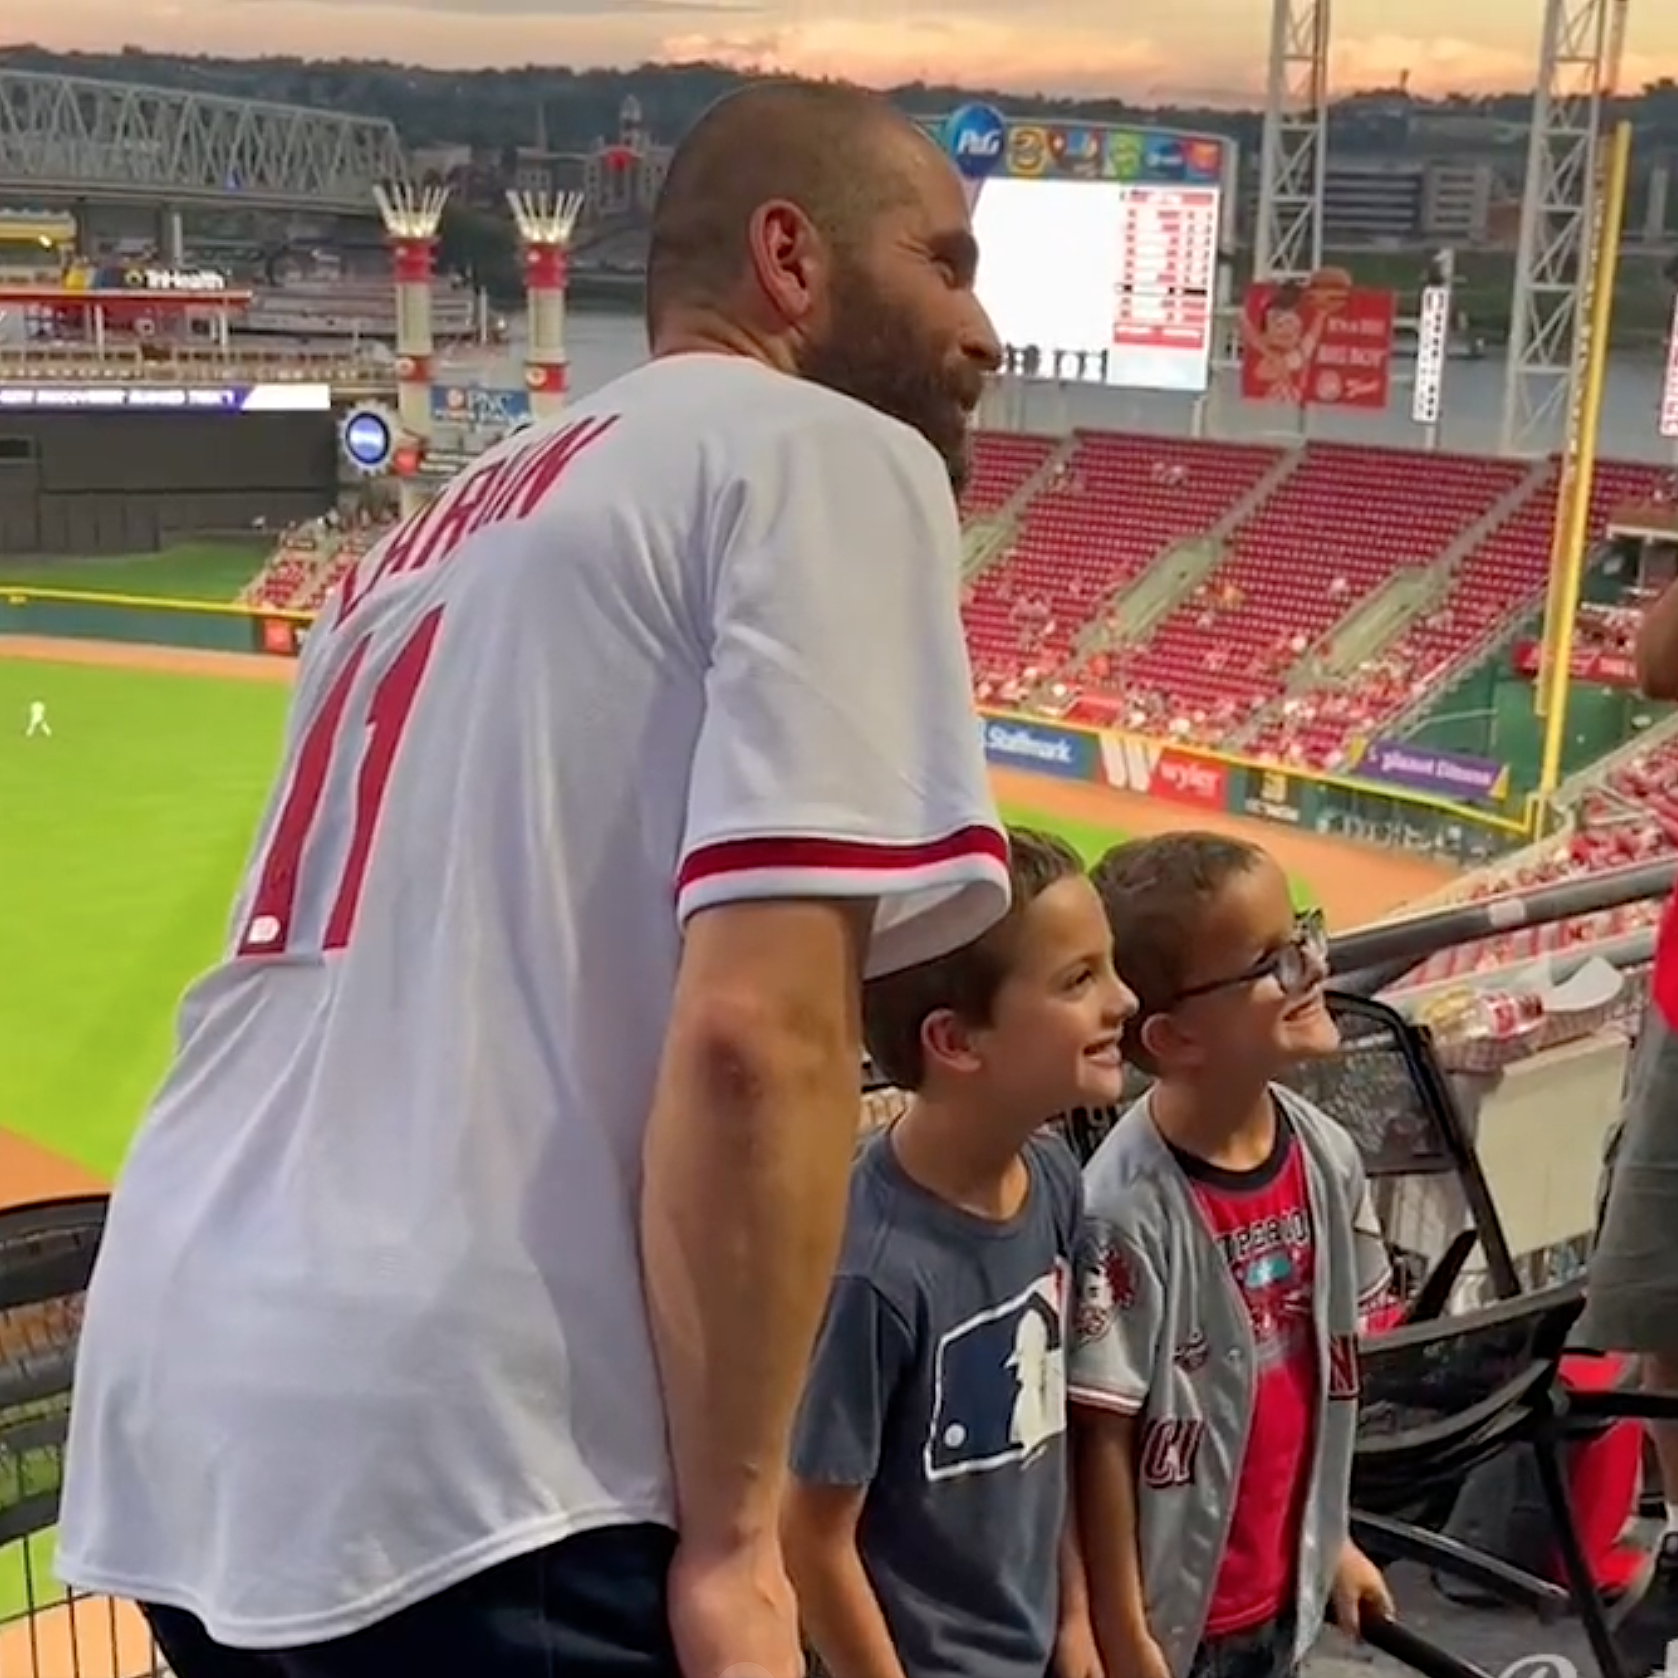 Joey Votto hanging out in the stands with Reds fans while out with injury  will make you feel all warm and fuzzy inside, This is the Loop